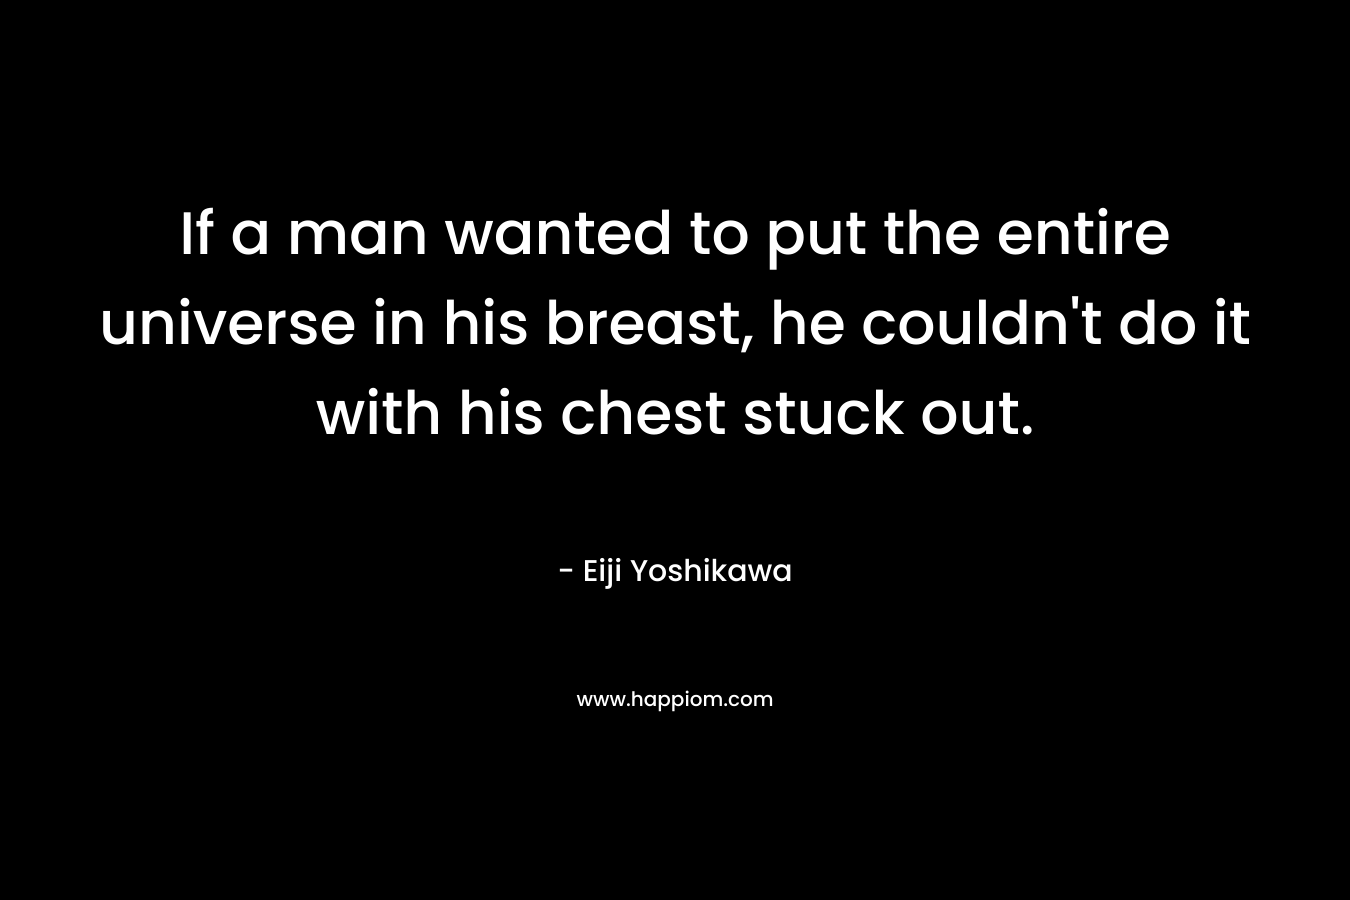 If a man wanted to put the entire universe in his breast, he couldn't do it with his chest stuck out.